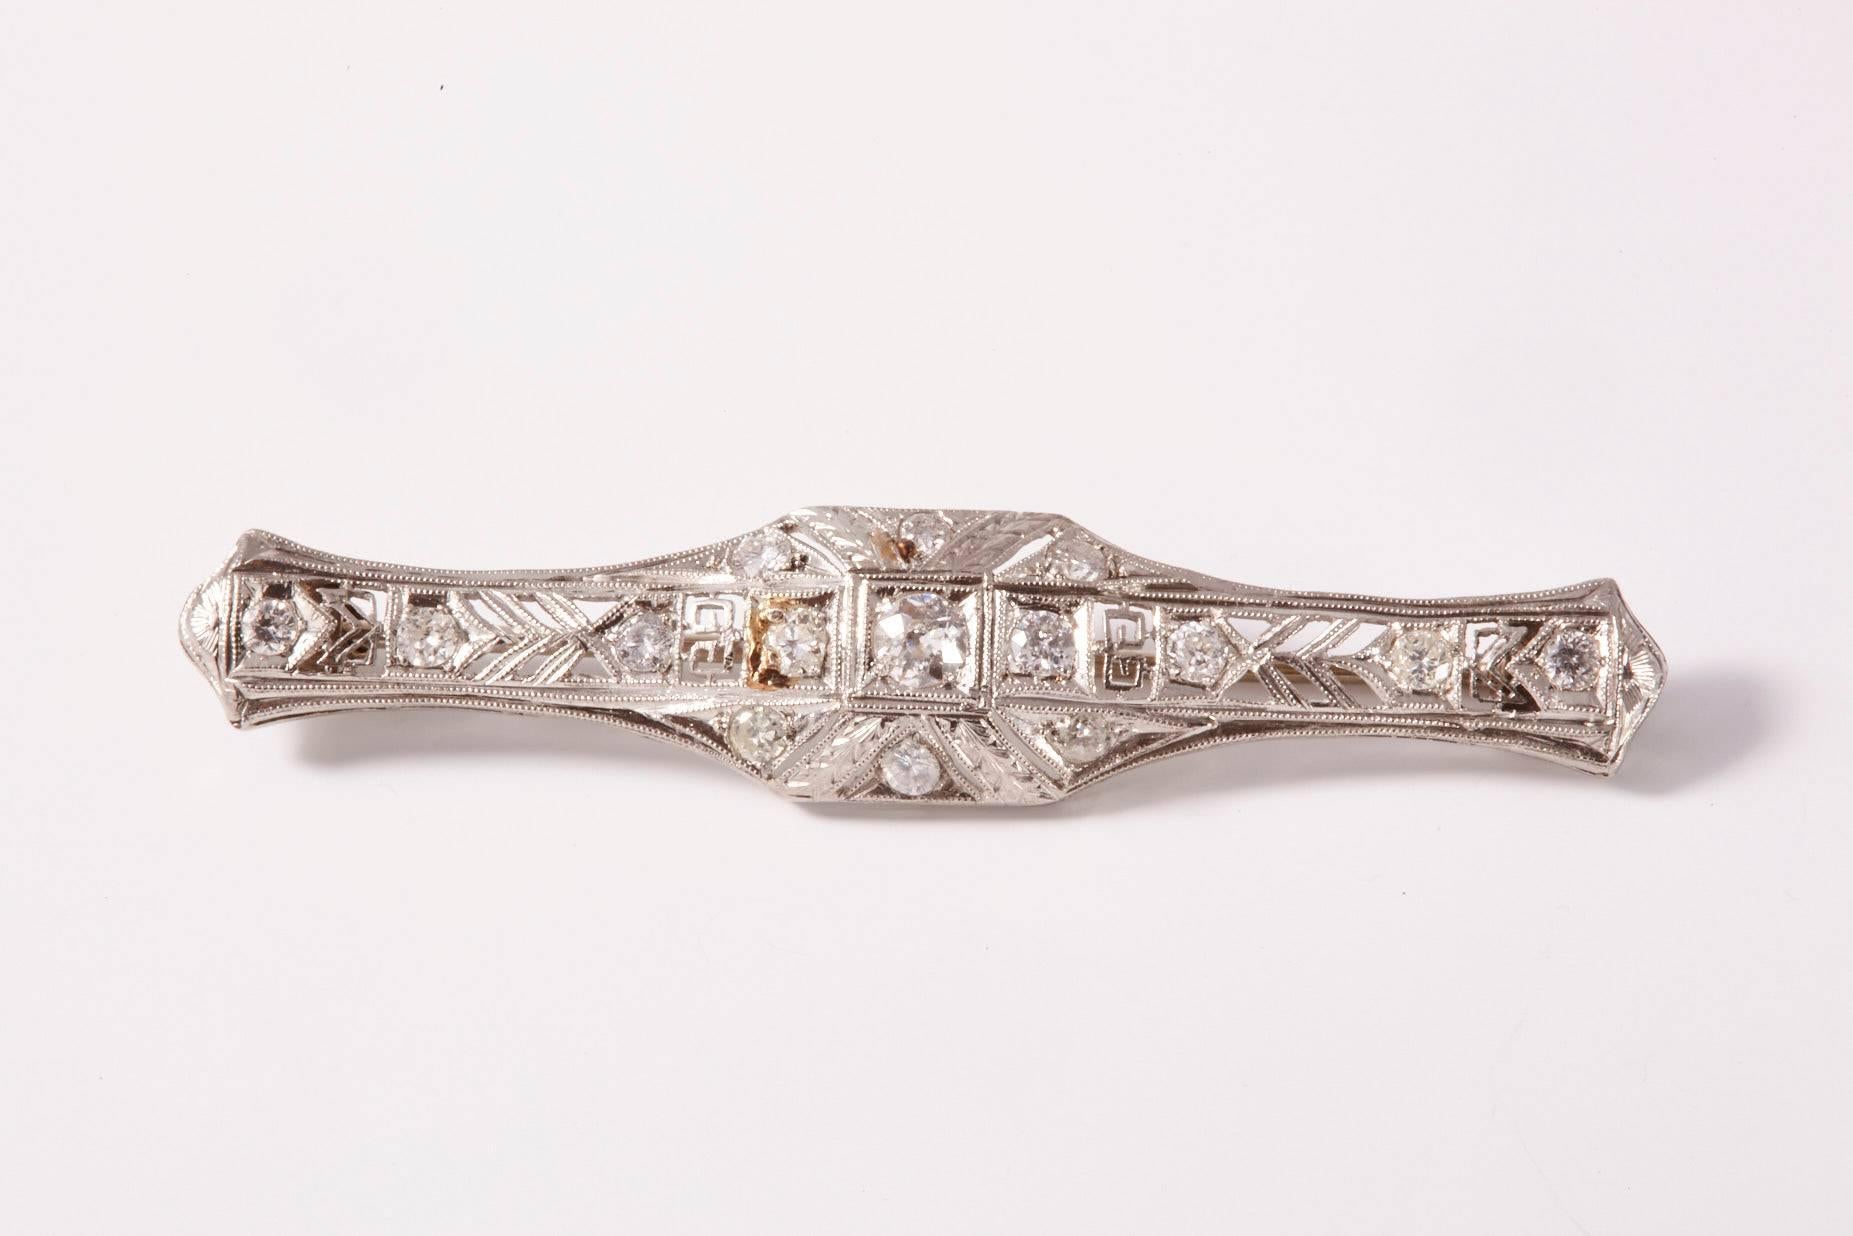 An Art Deco Diamond Bar Brooch, set with old-cut diamonds, one larger center stone, surrounded with millegrain and diamonds. The center design incorporates Greek Key edging with beautiful, clean craftsmanship.
Art Deco mounted in platinum-upon-gold.